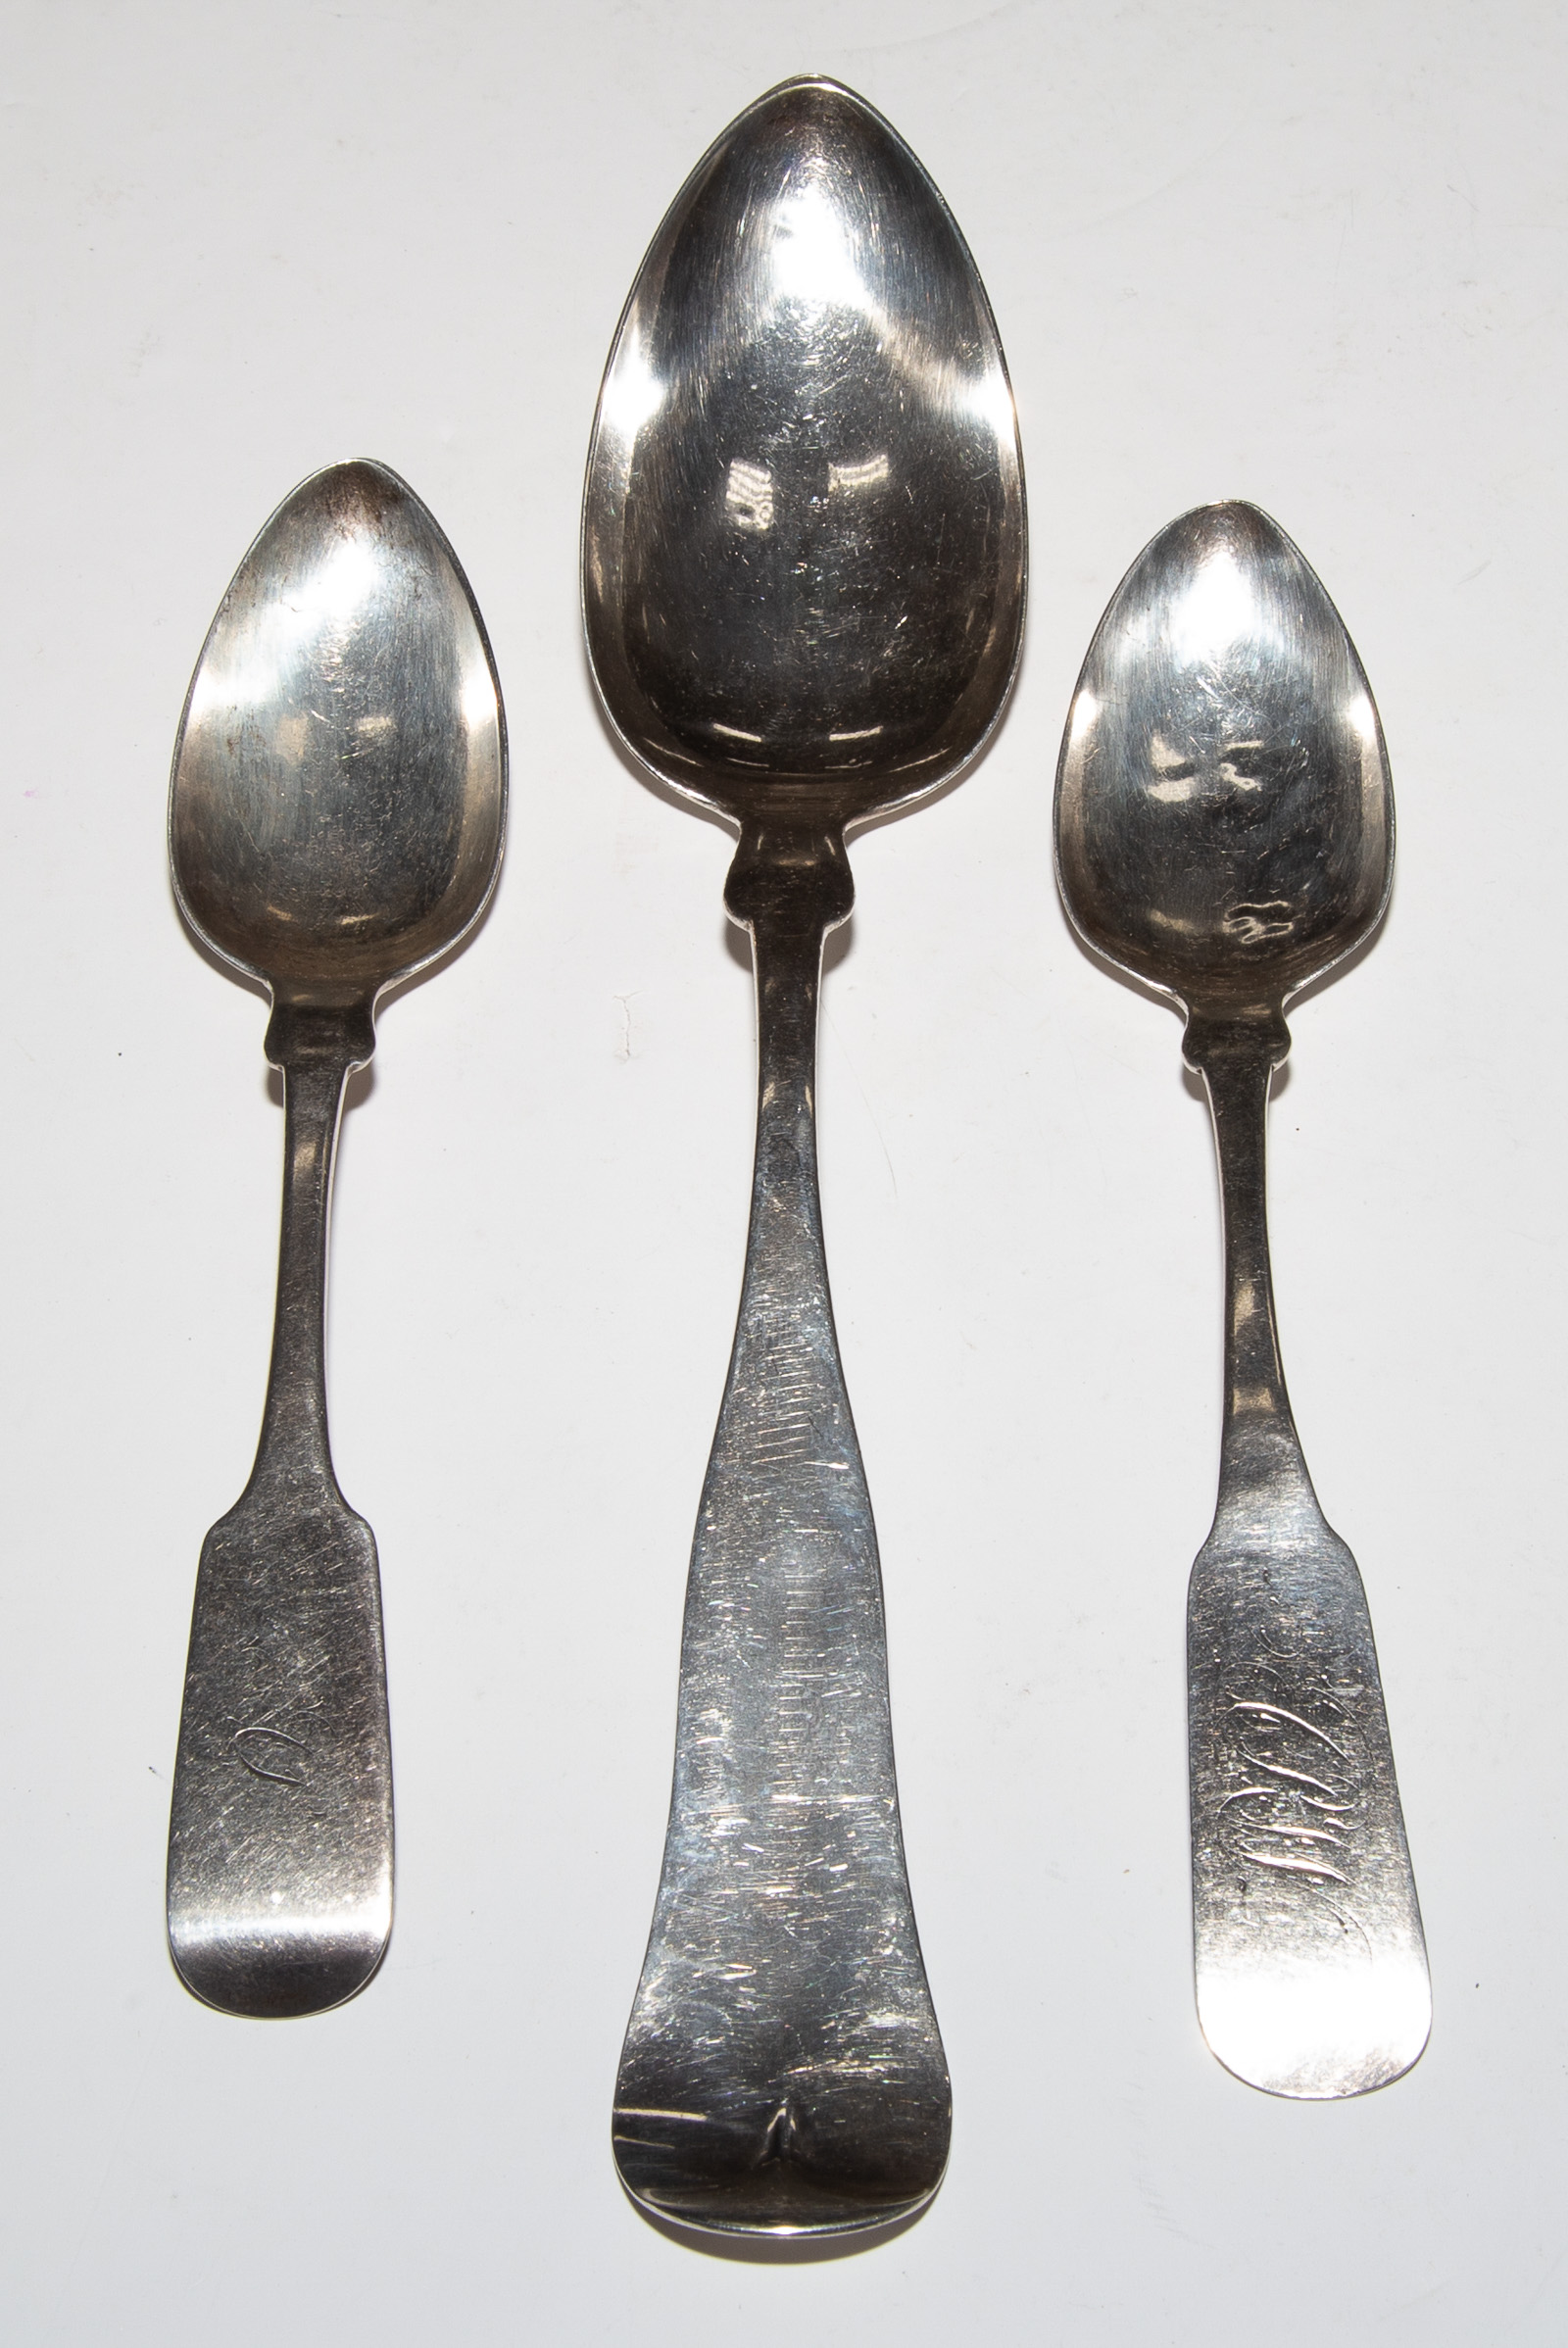 THREE AMERICAN COIN SILVER SPOONS 3384c4